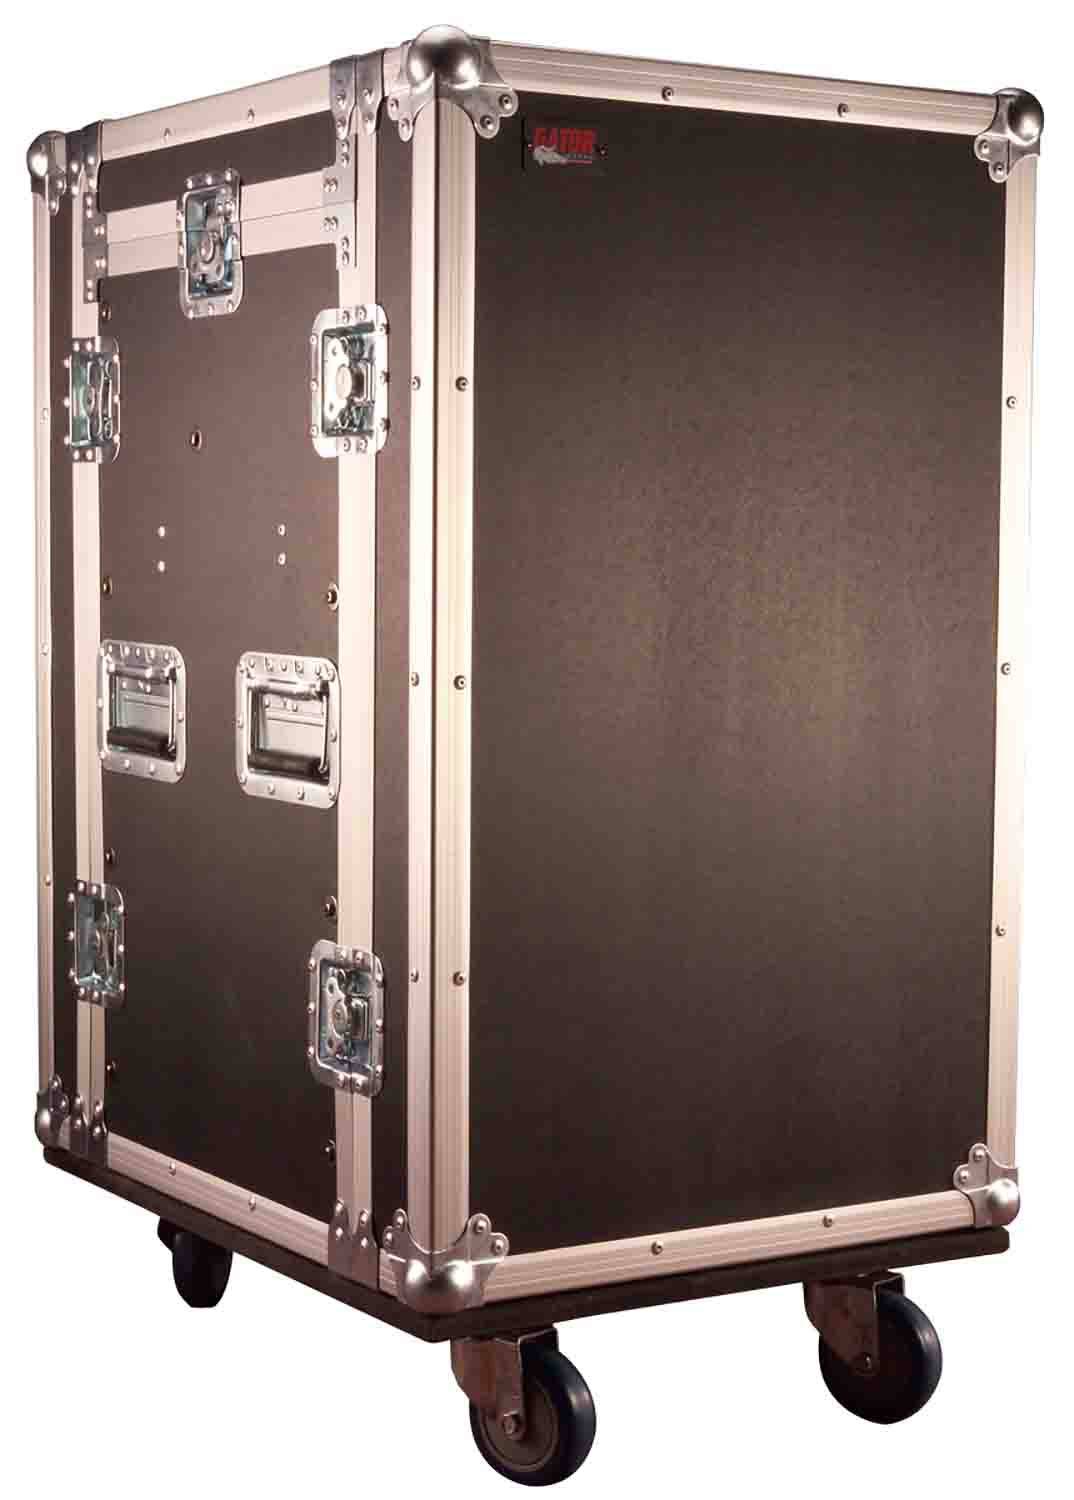 Gator Cases G-TOUR 10X14 PU, 10U Top 14U Side Console Rack Case with Casters - Hollywood DJ